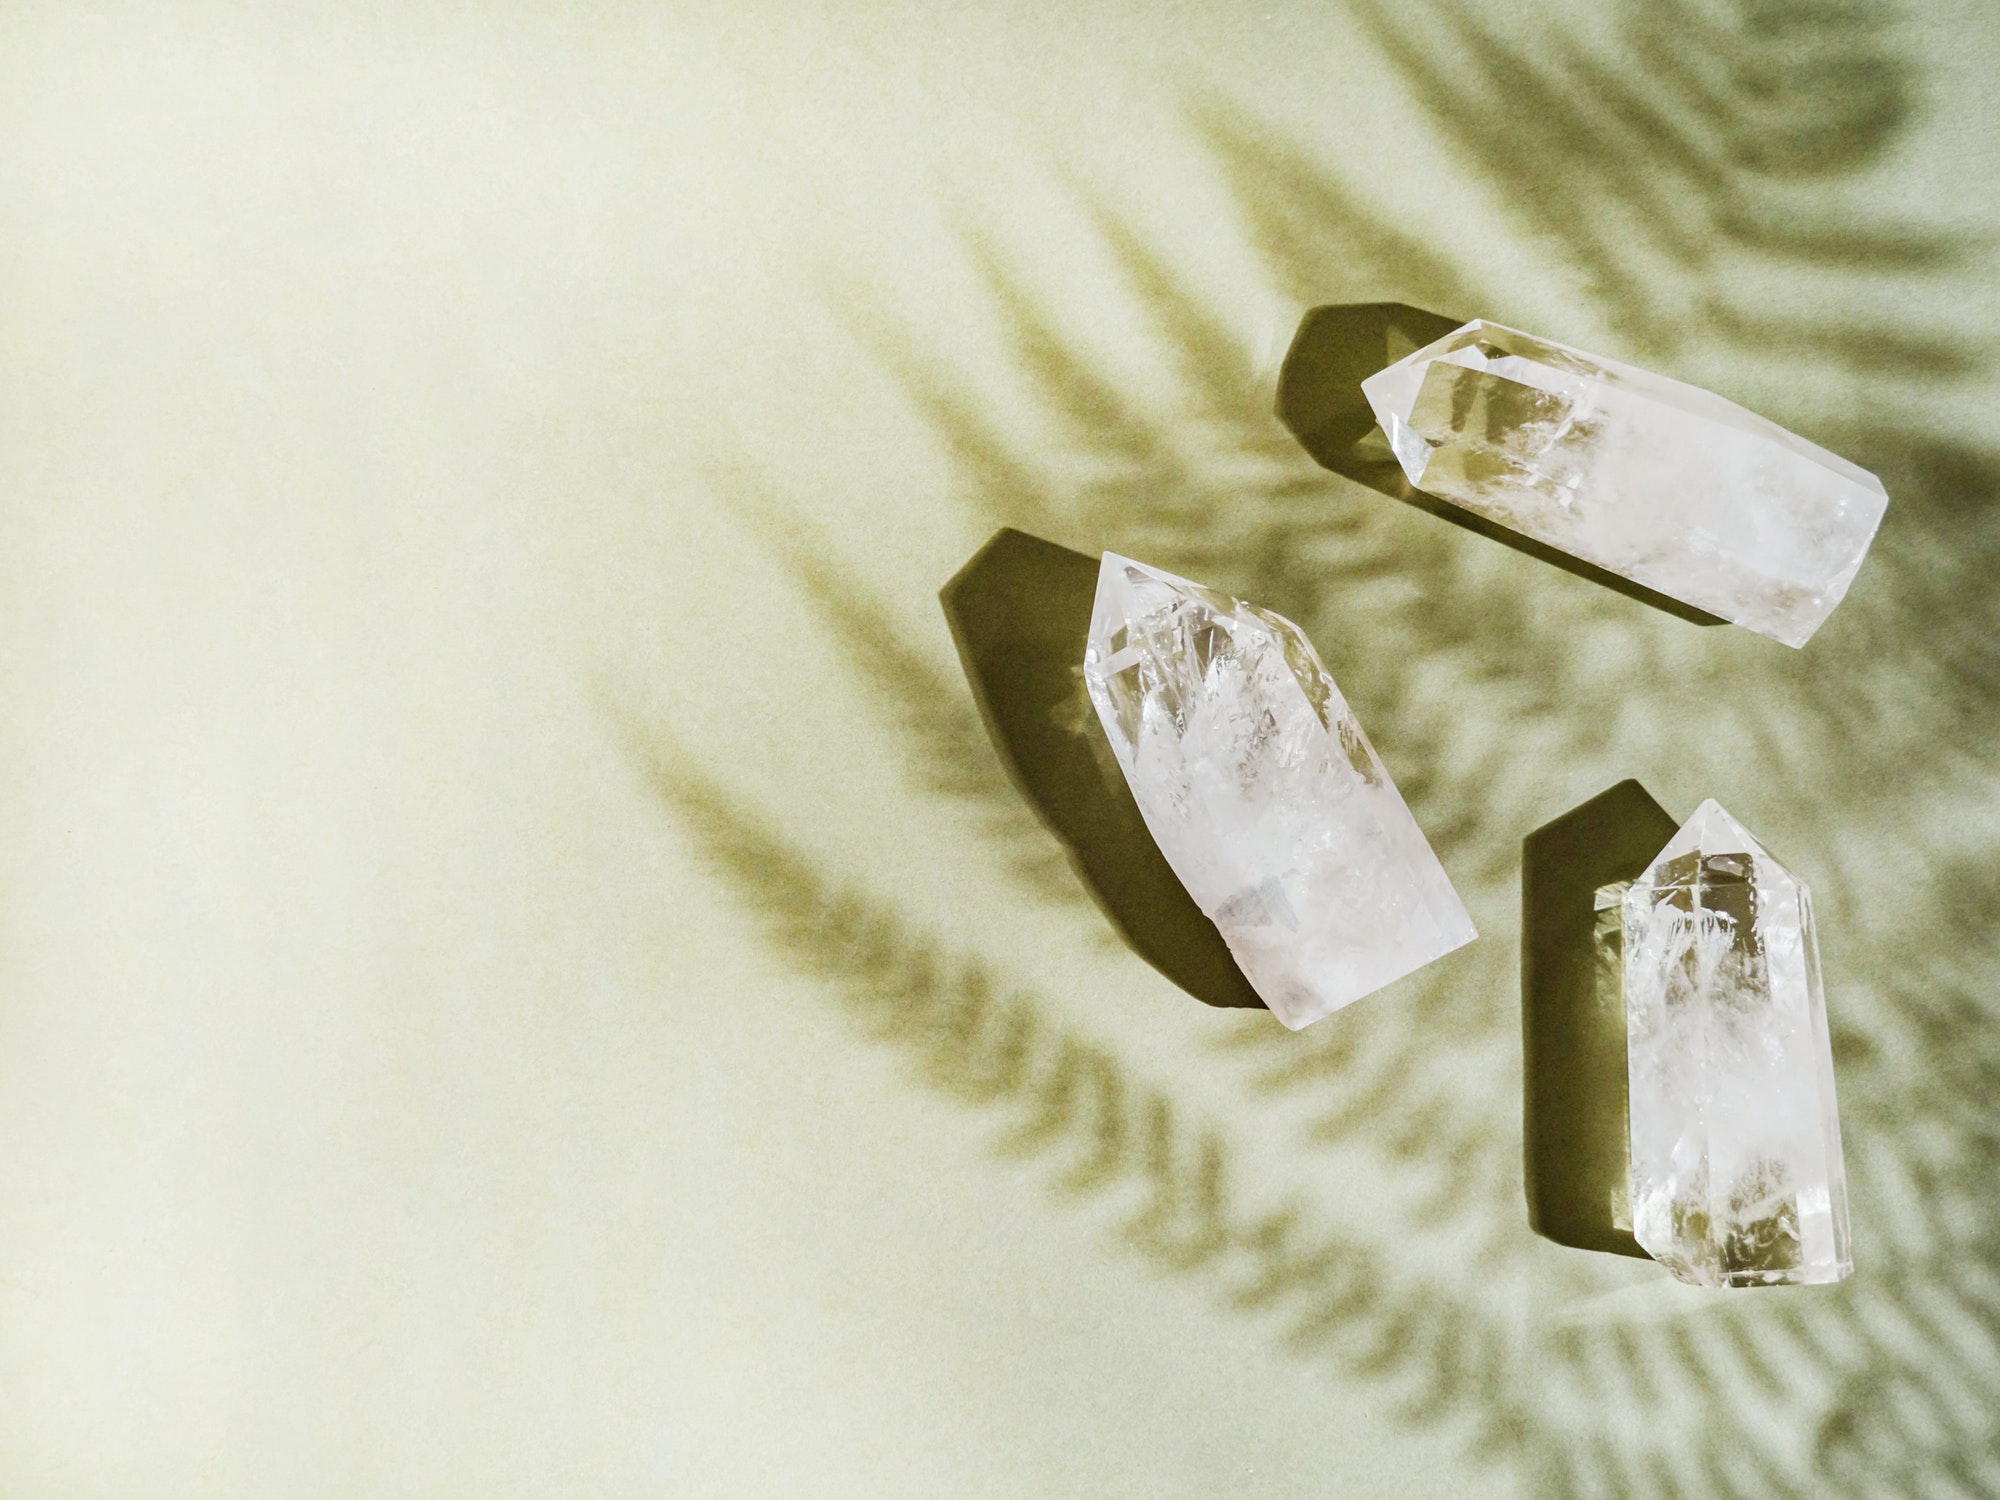 Collection of crystals quartz on green background with plant shadows.